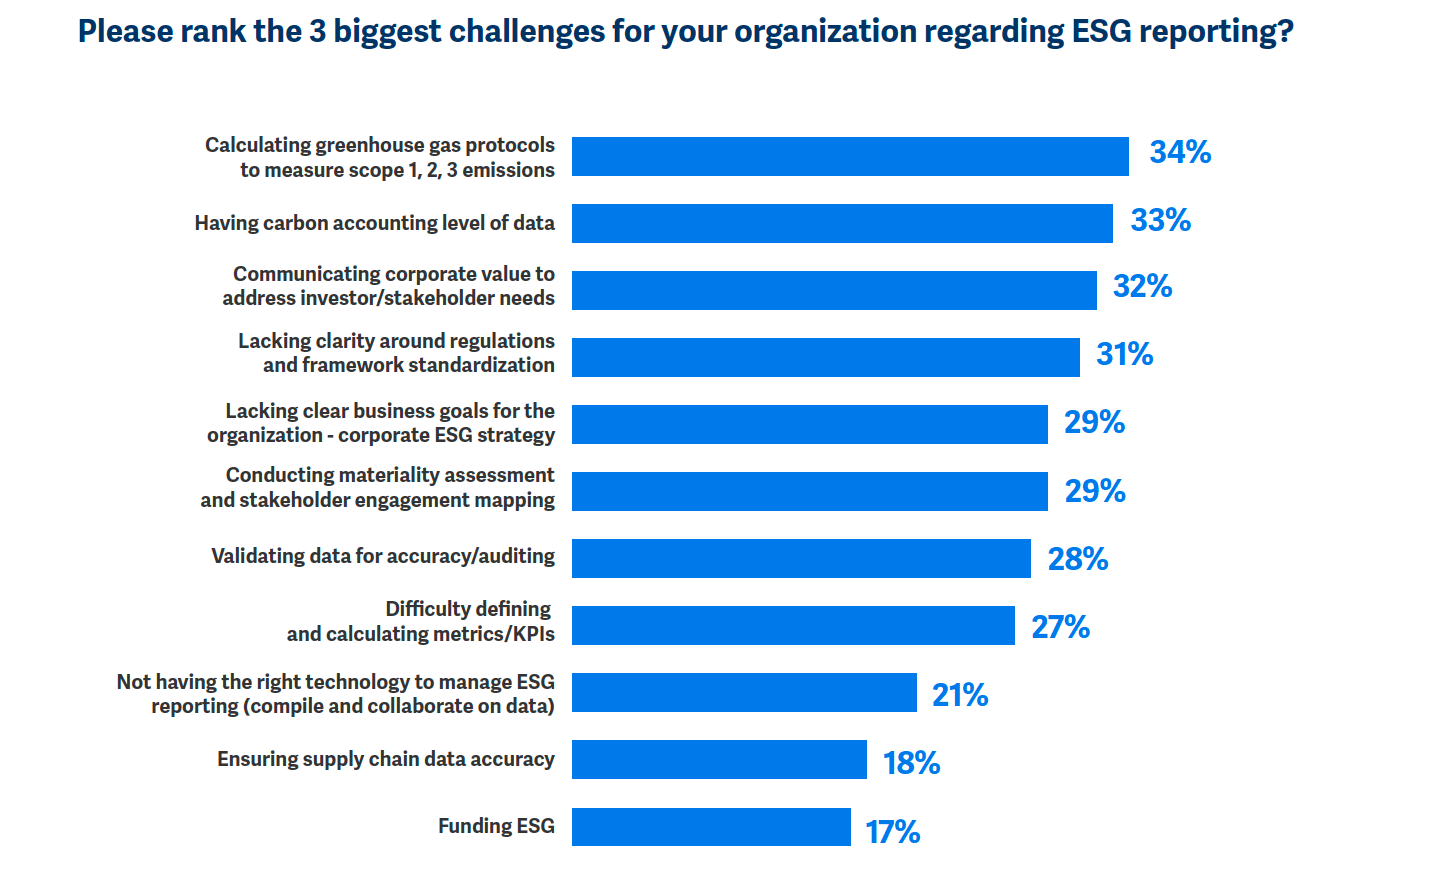 Companies say they’re underprepared to navigate the evolving ESG reporting landscape